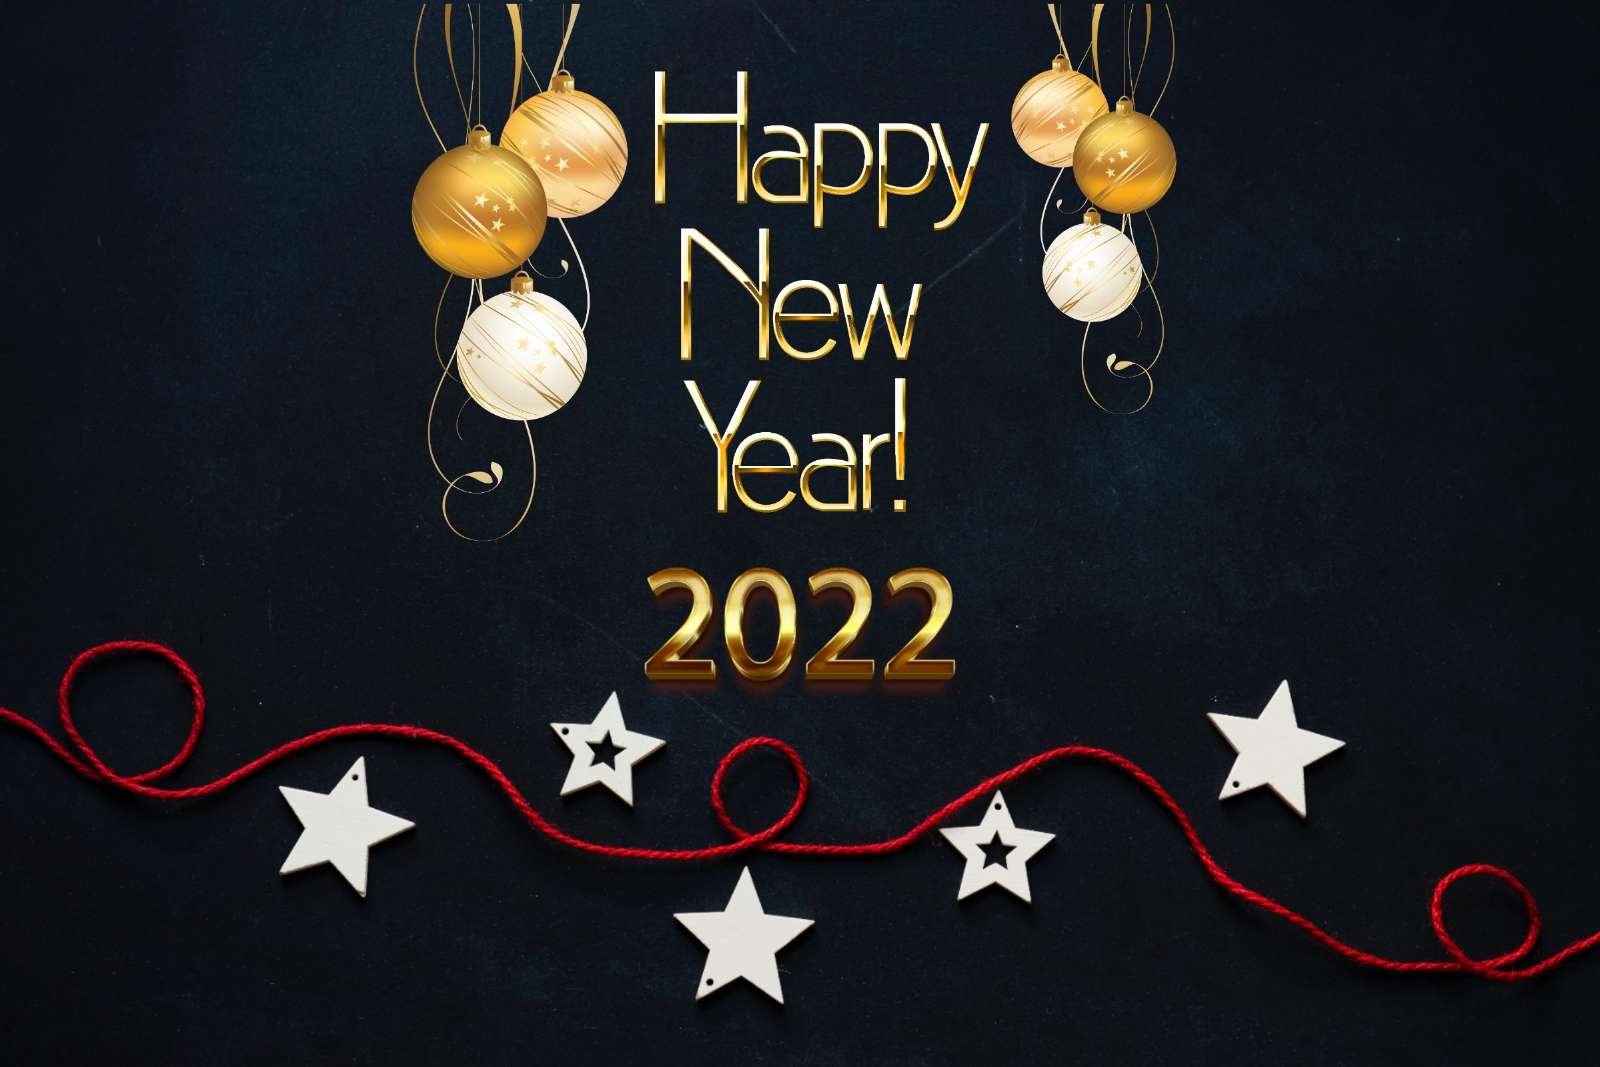 Happy New Year 2022 Images - Free Download on Freepik